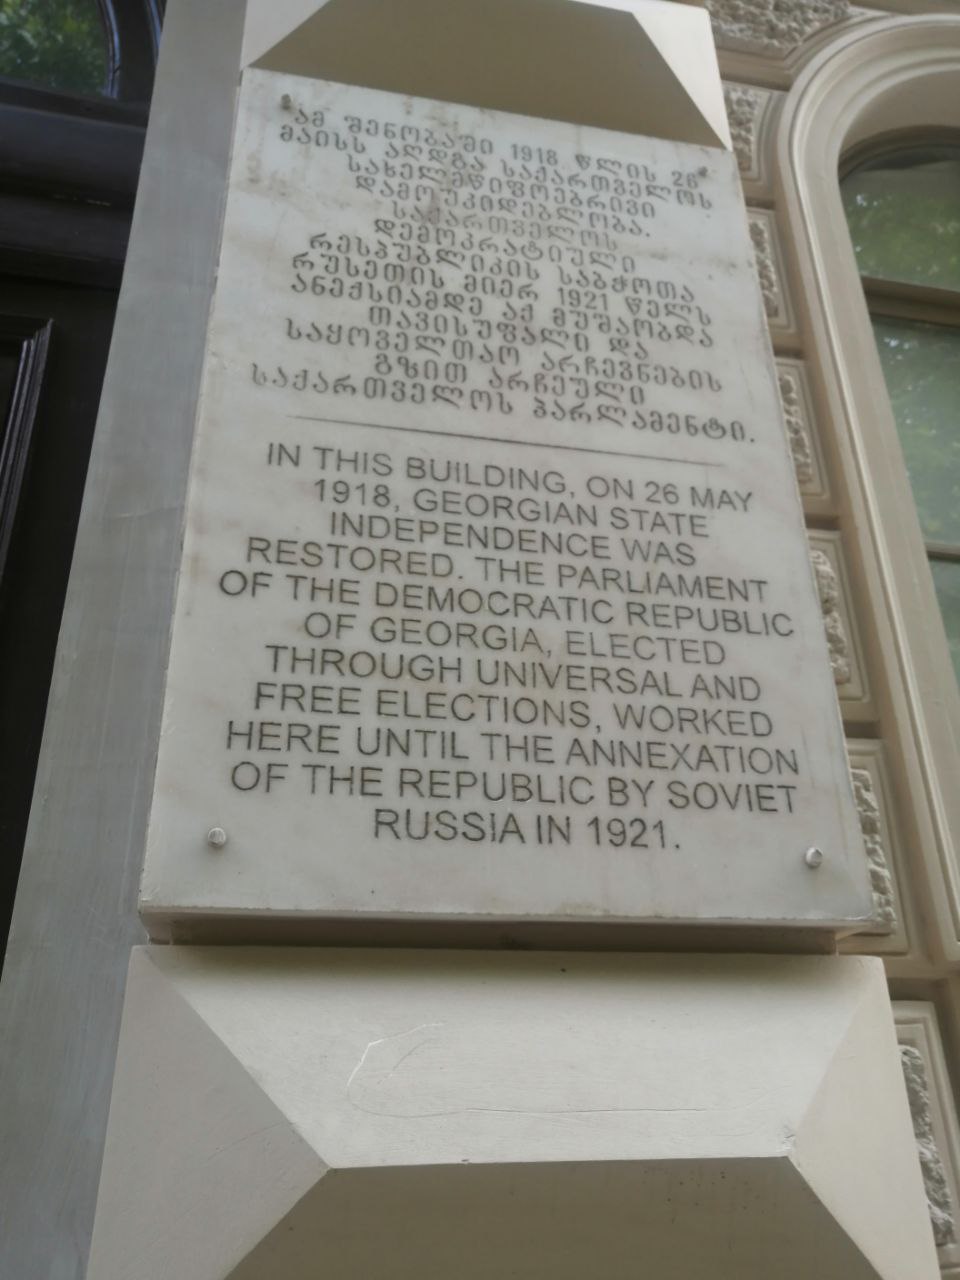 A plaque on the parliament building. Photo by the author.